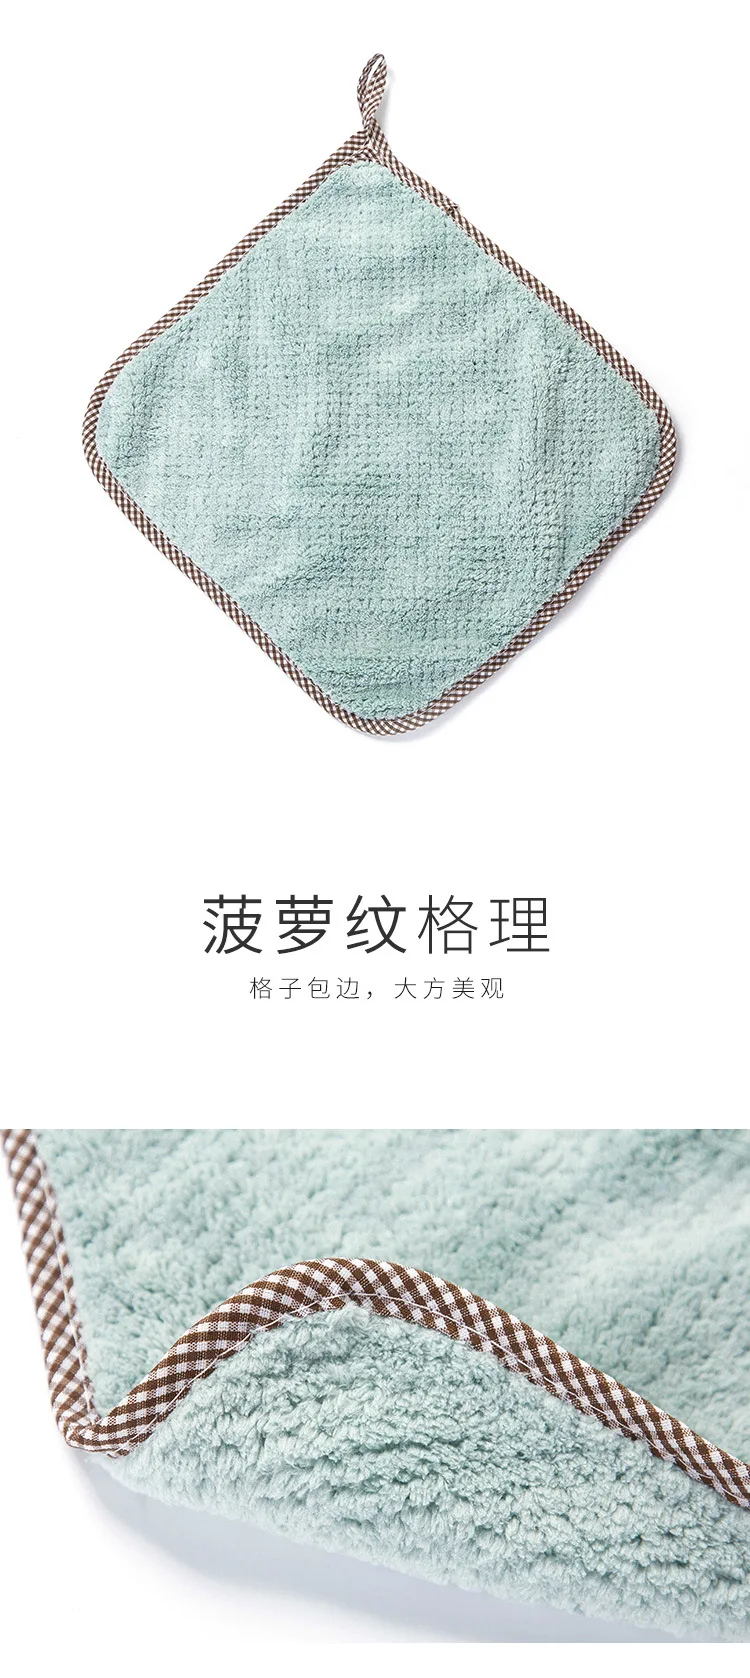 Details about  / Dish Towel Microfiber Absorbent Thicker Cleaning Wiping Rag Sink Coral Fleece